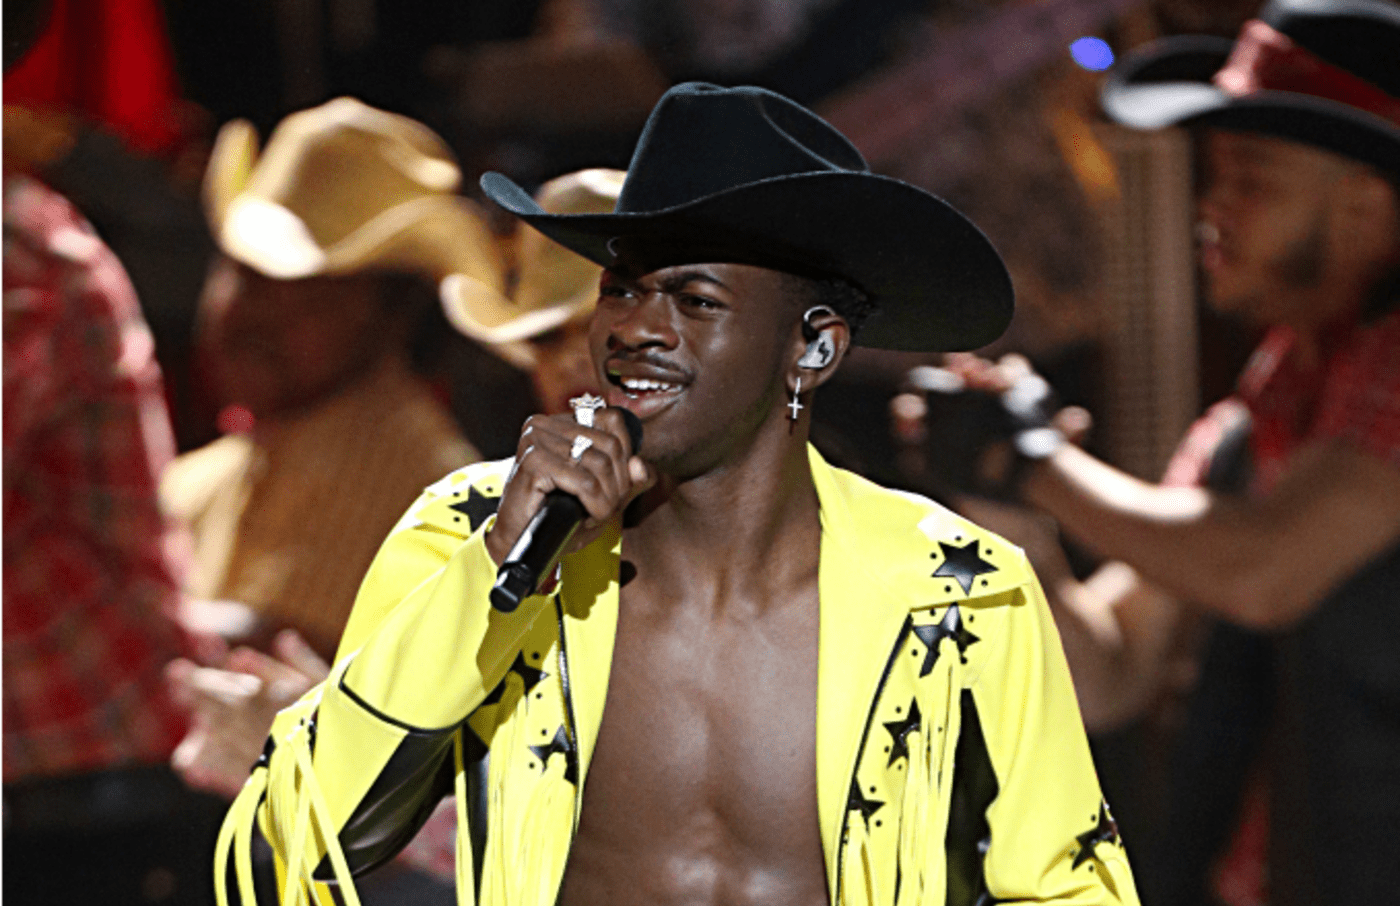 Lil Nas X performs onstage at the 2019 BET Awards